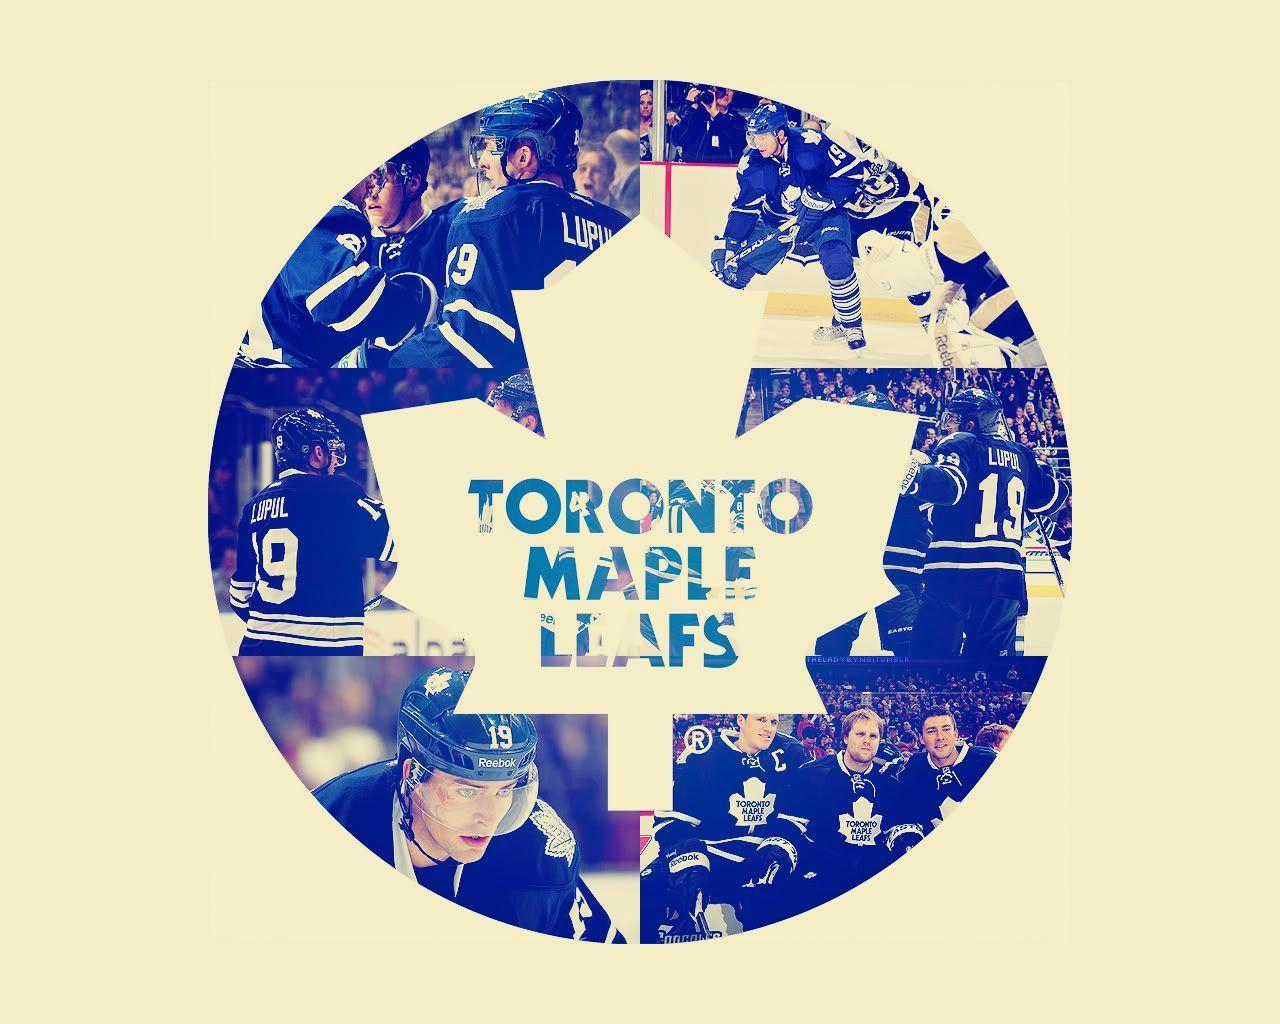 Looking for a Leafs 1280x1024 wallpaper